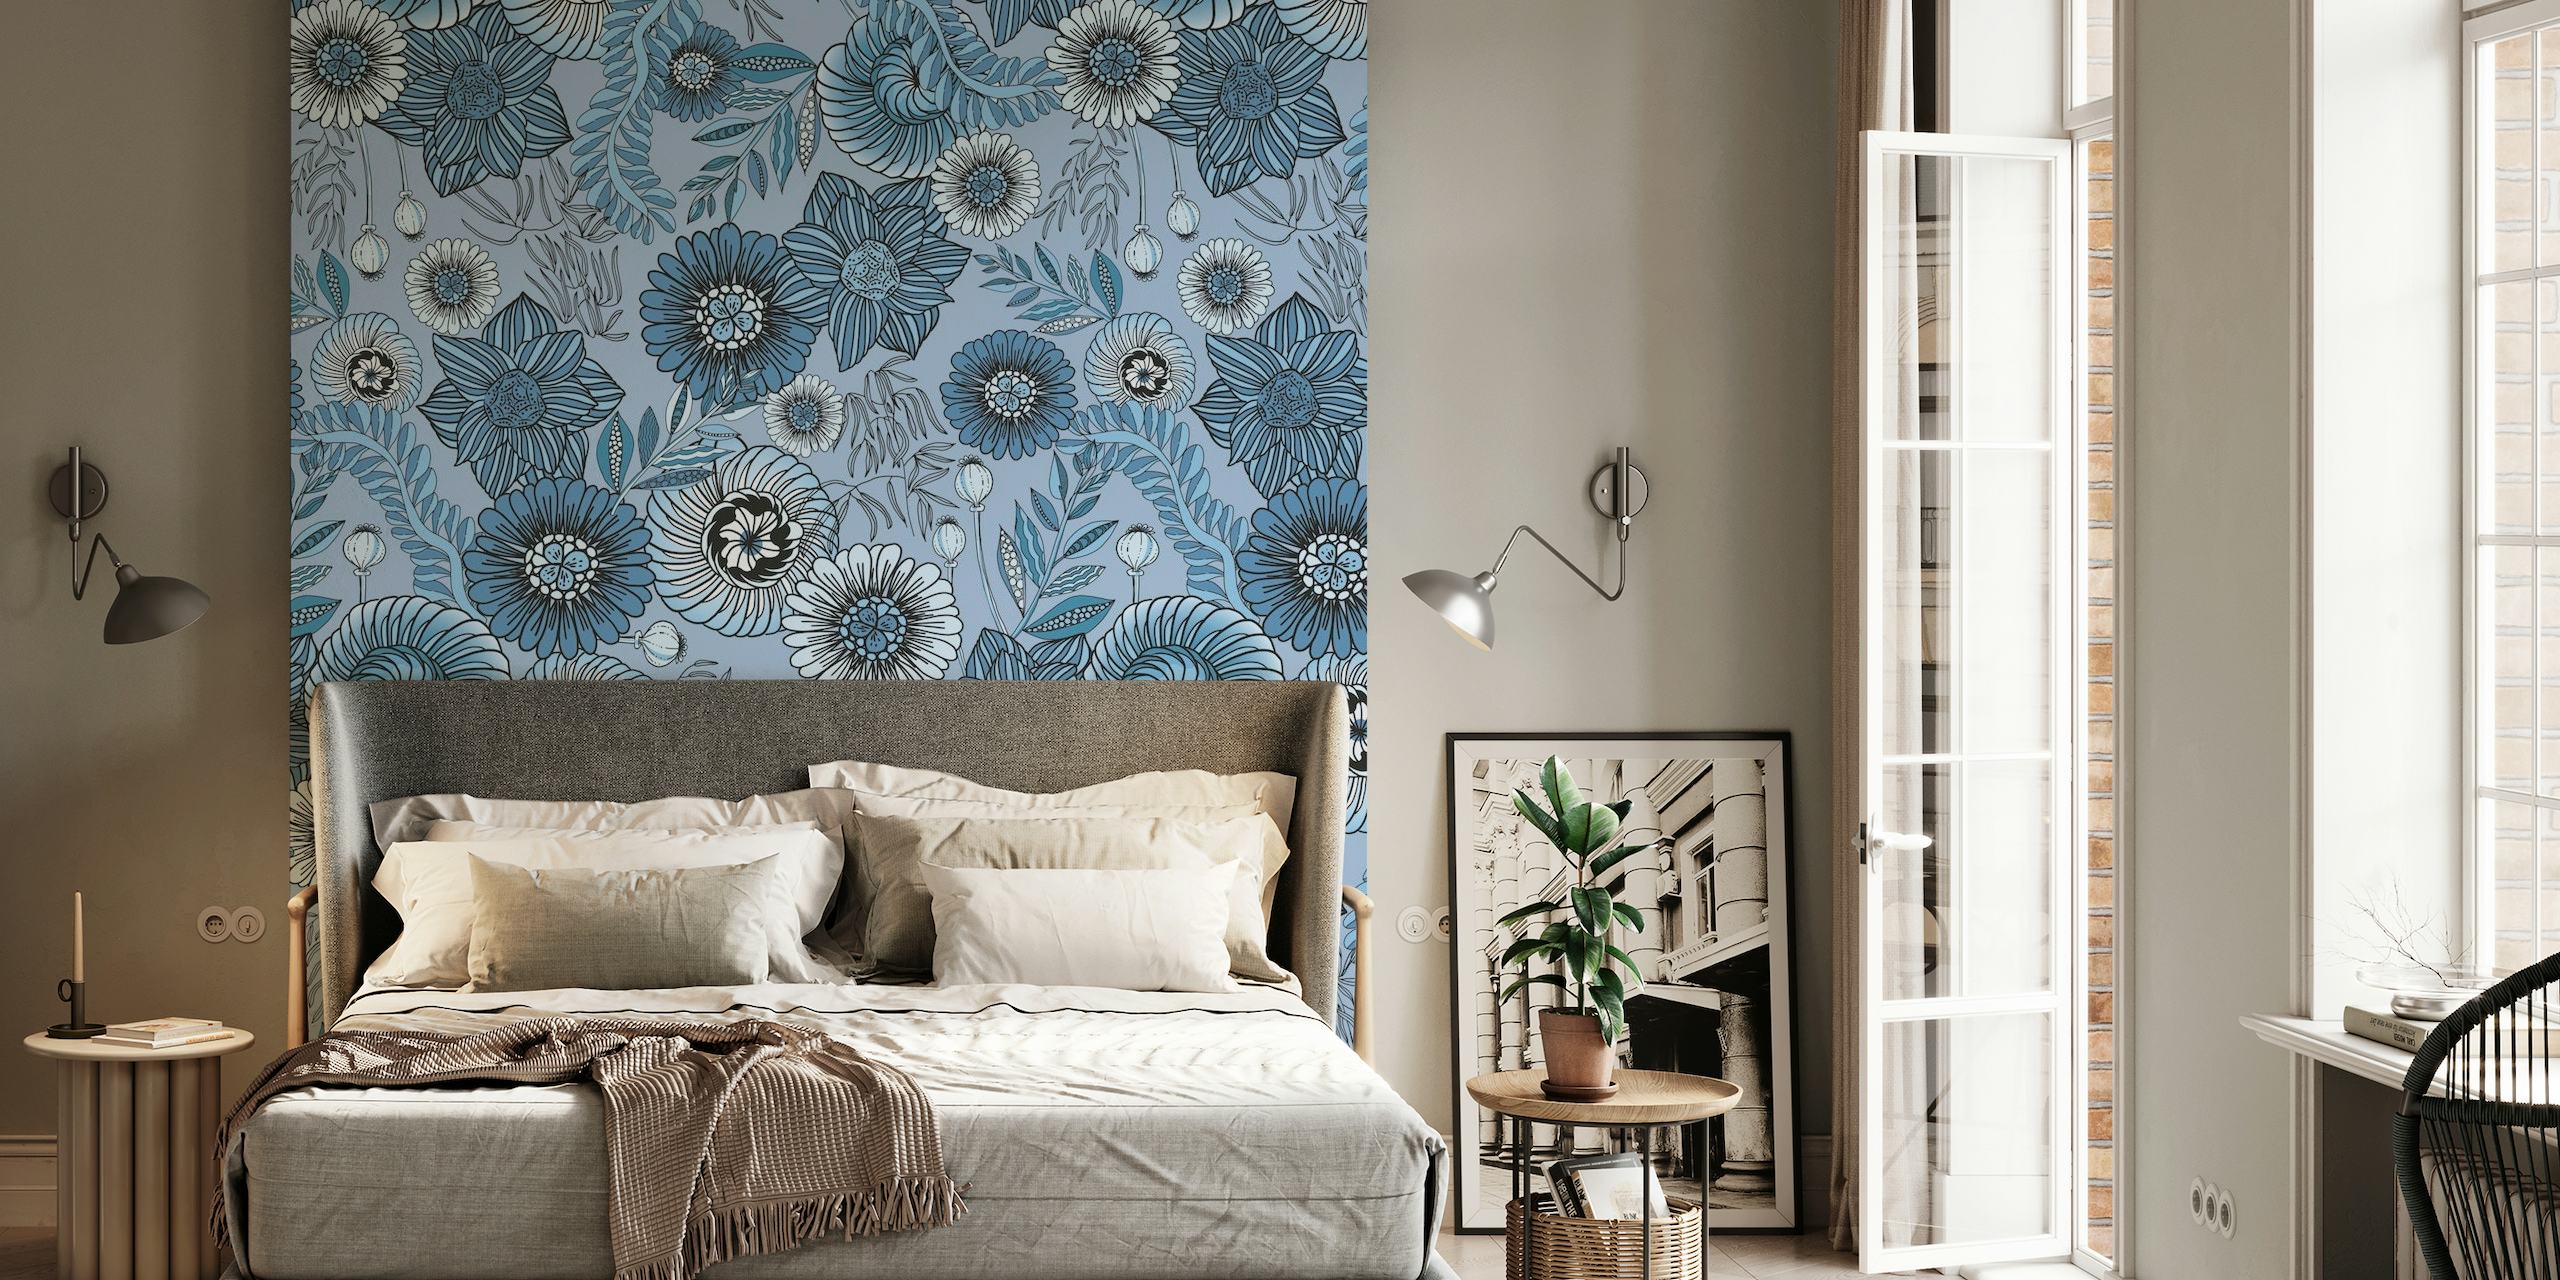 Blue moody flowers wall mural with intricate floral patterns in blue hues.